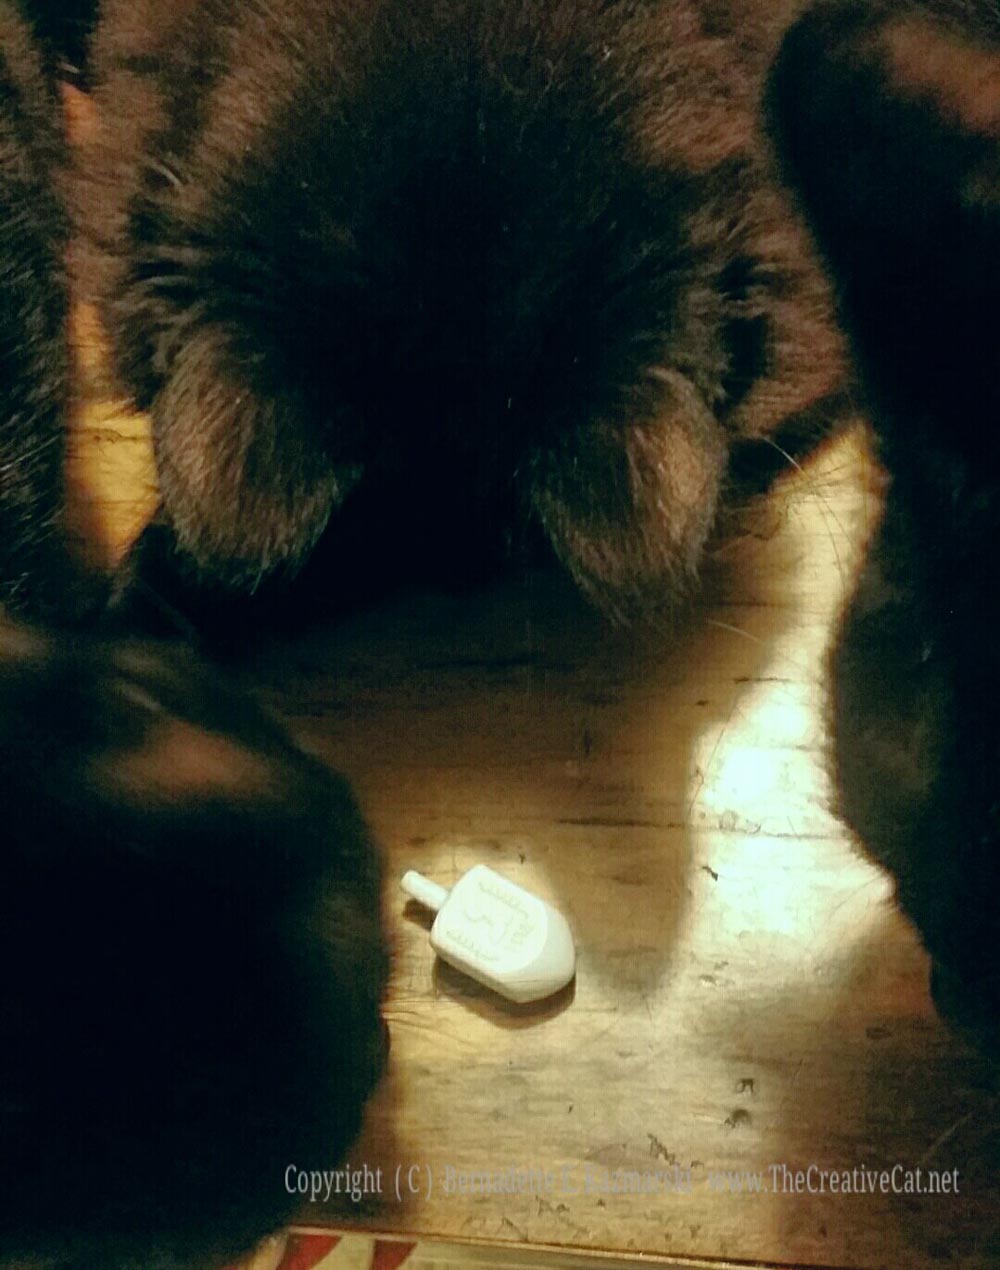 Simon looks at the dreidel; he can't figure it out either.